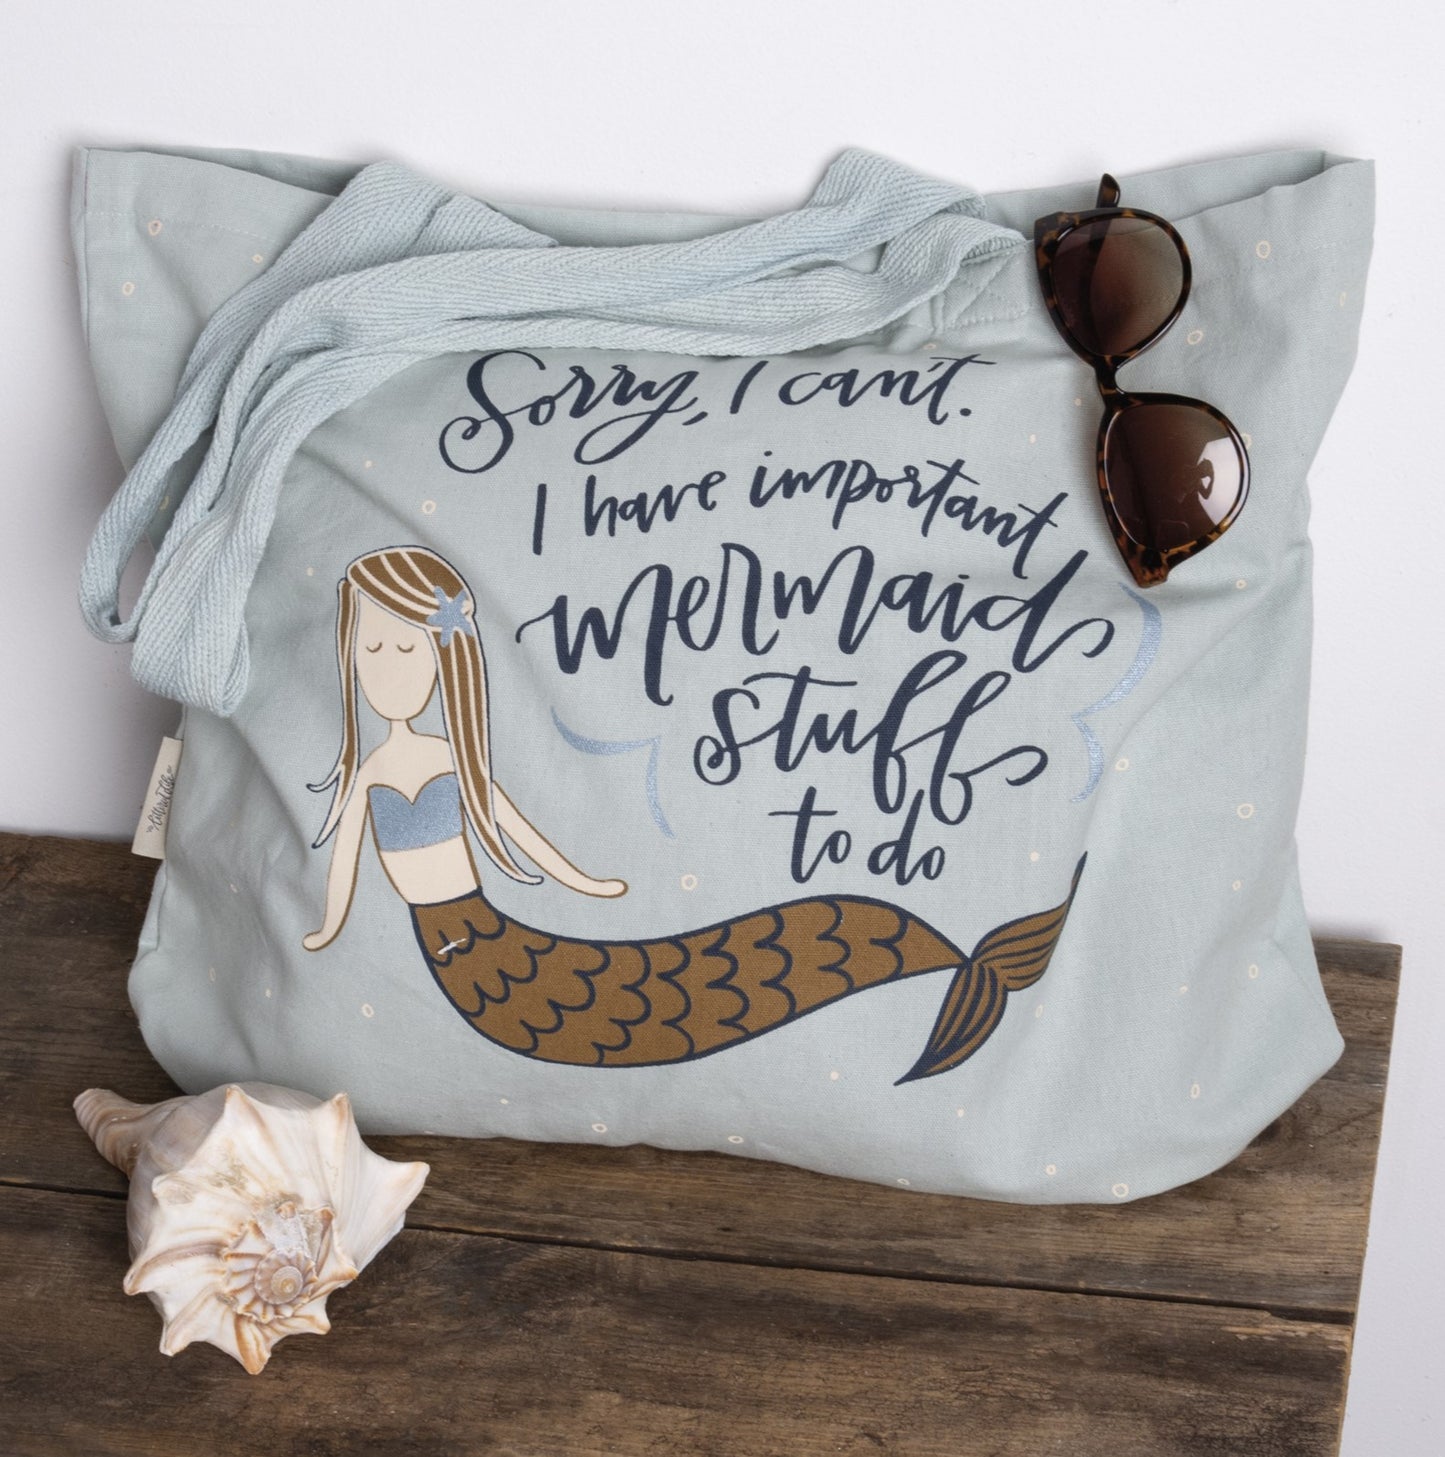 "Sorry, I Can't. I Have Important Mermaid Stuff To Do" - Mermaid Tote Bag PRE - ORDER